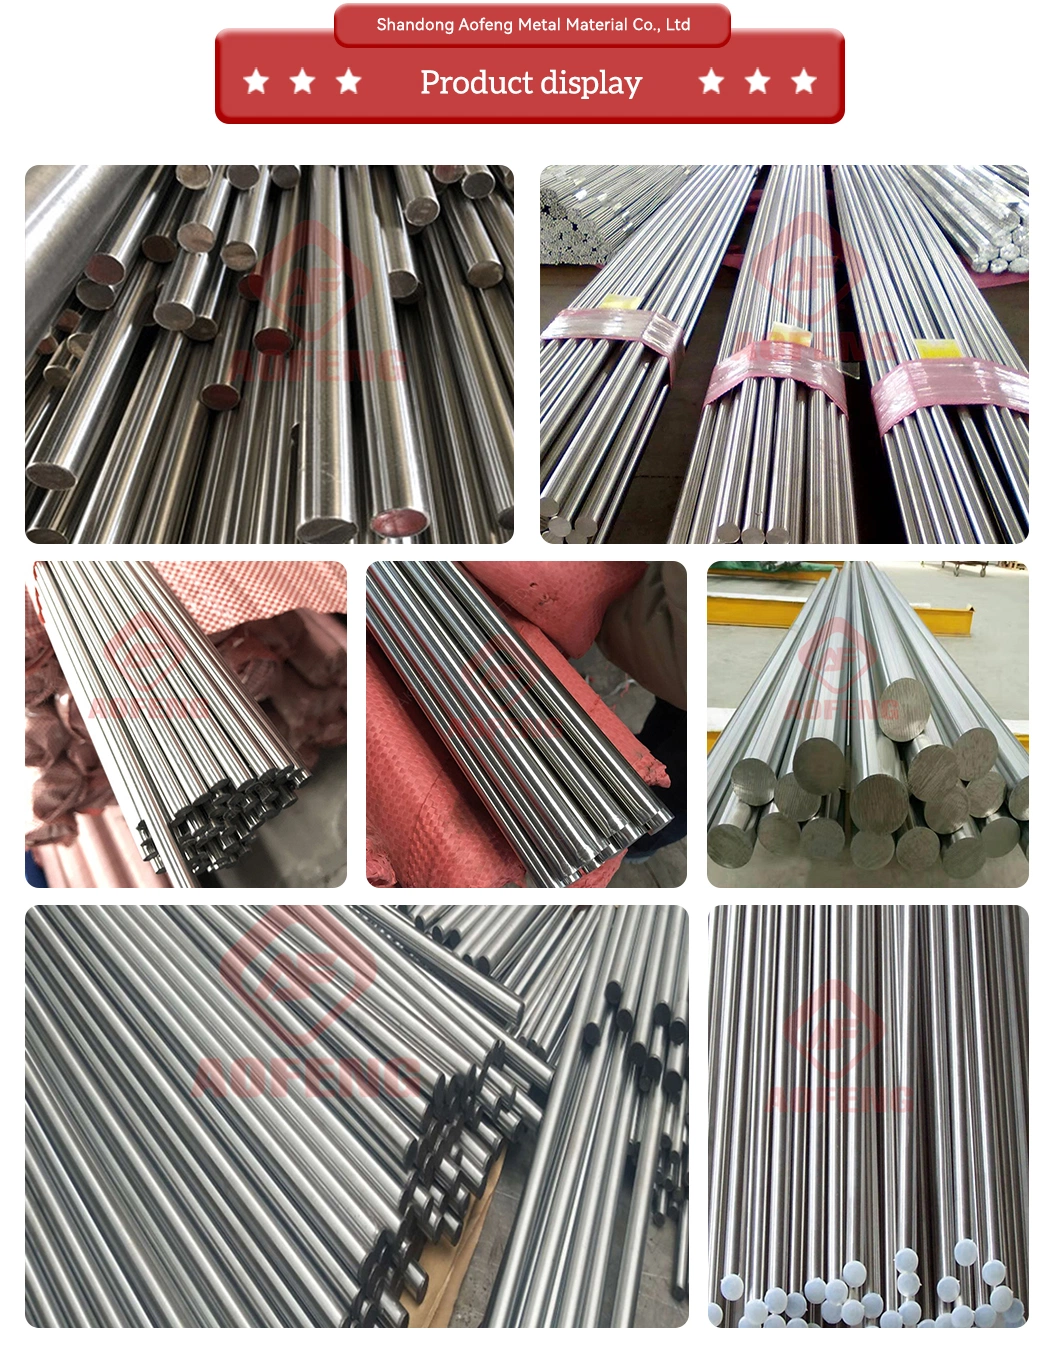 Prime Quality Ss Bar 1mm 2mm 2.5mm 3mm 4mm 304 316 316L Stainless Steel Rod